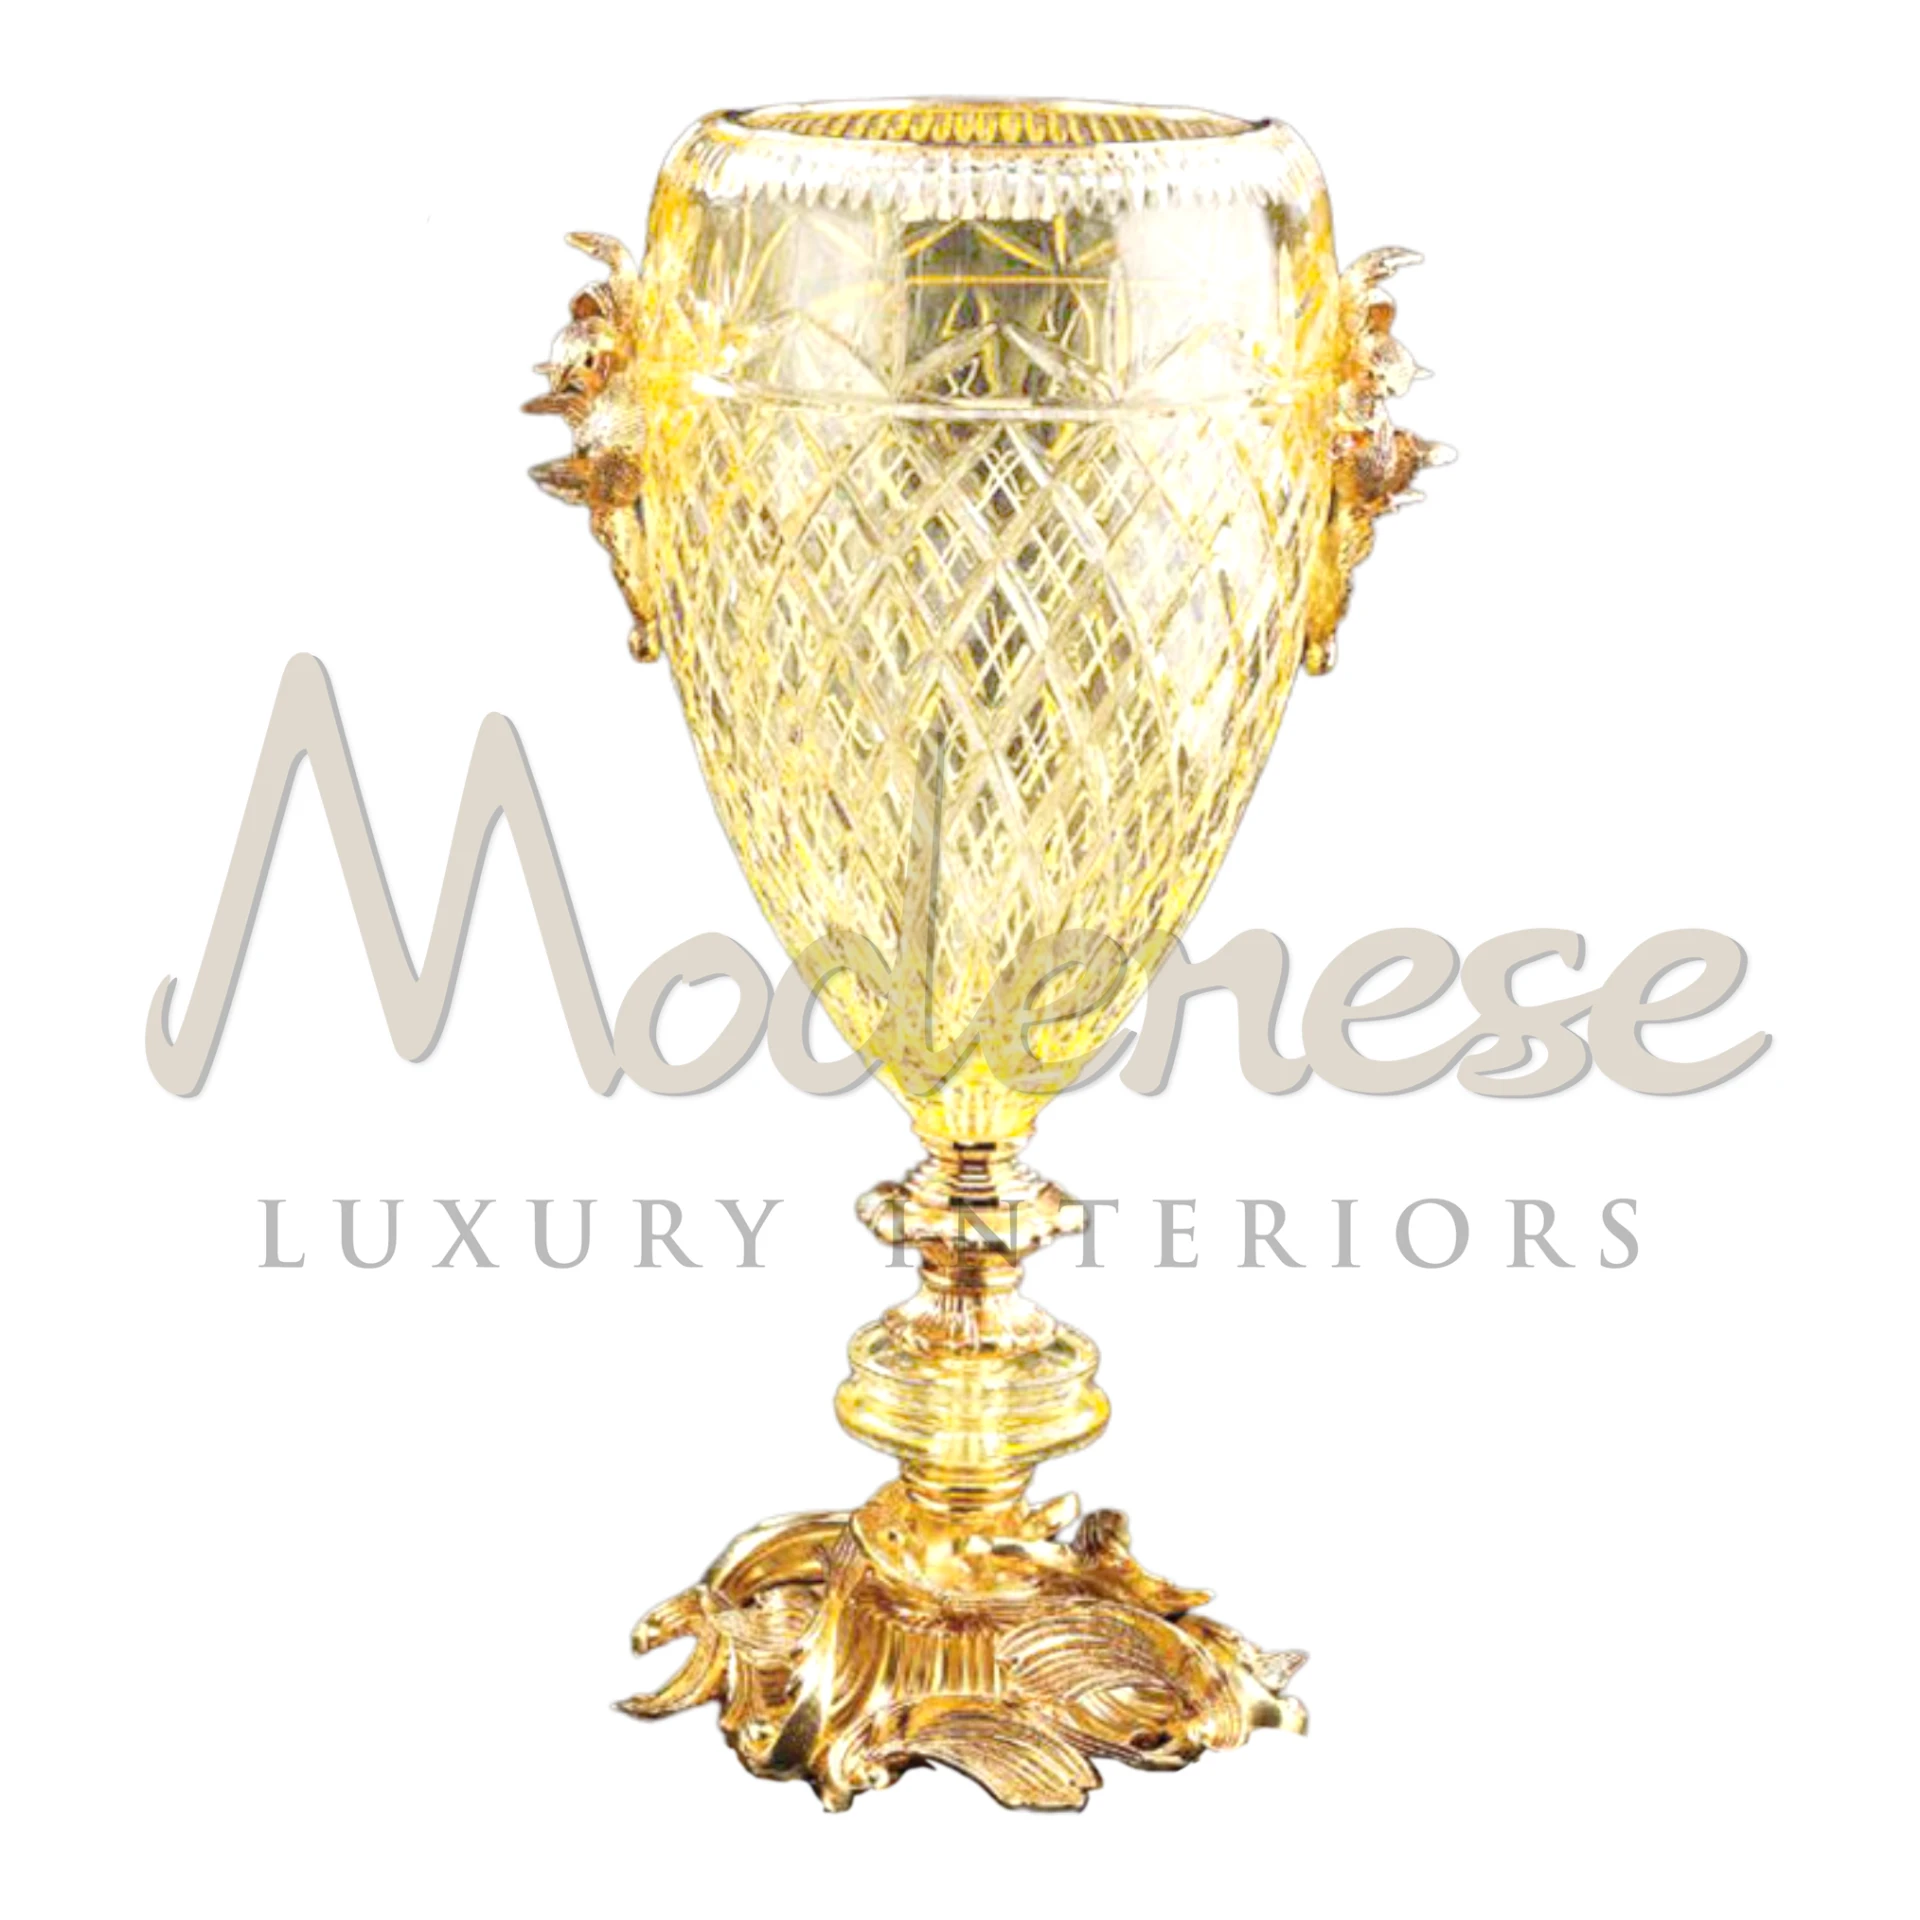 Traditional Tall Light Yellow Glass Vase, featuring ornate patterns and textured surfaces, brings warmth and elegance to luxury and classic interior designs.